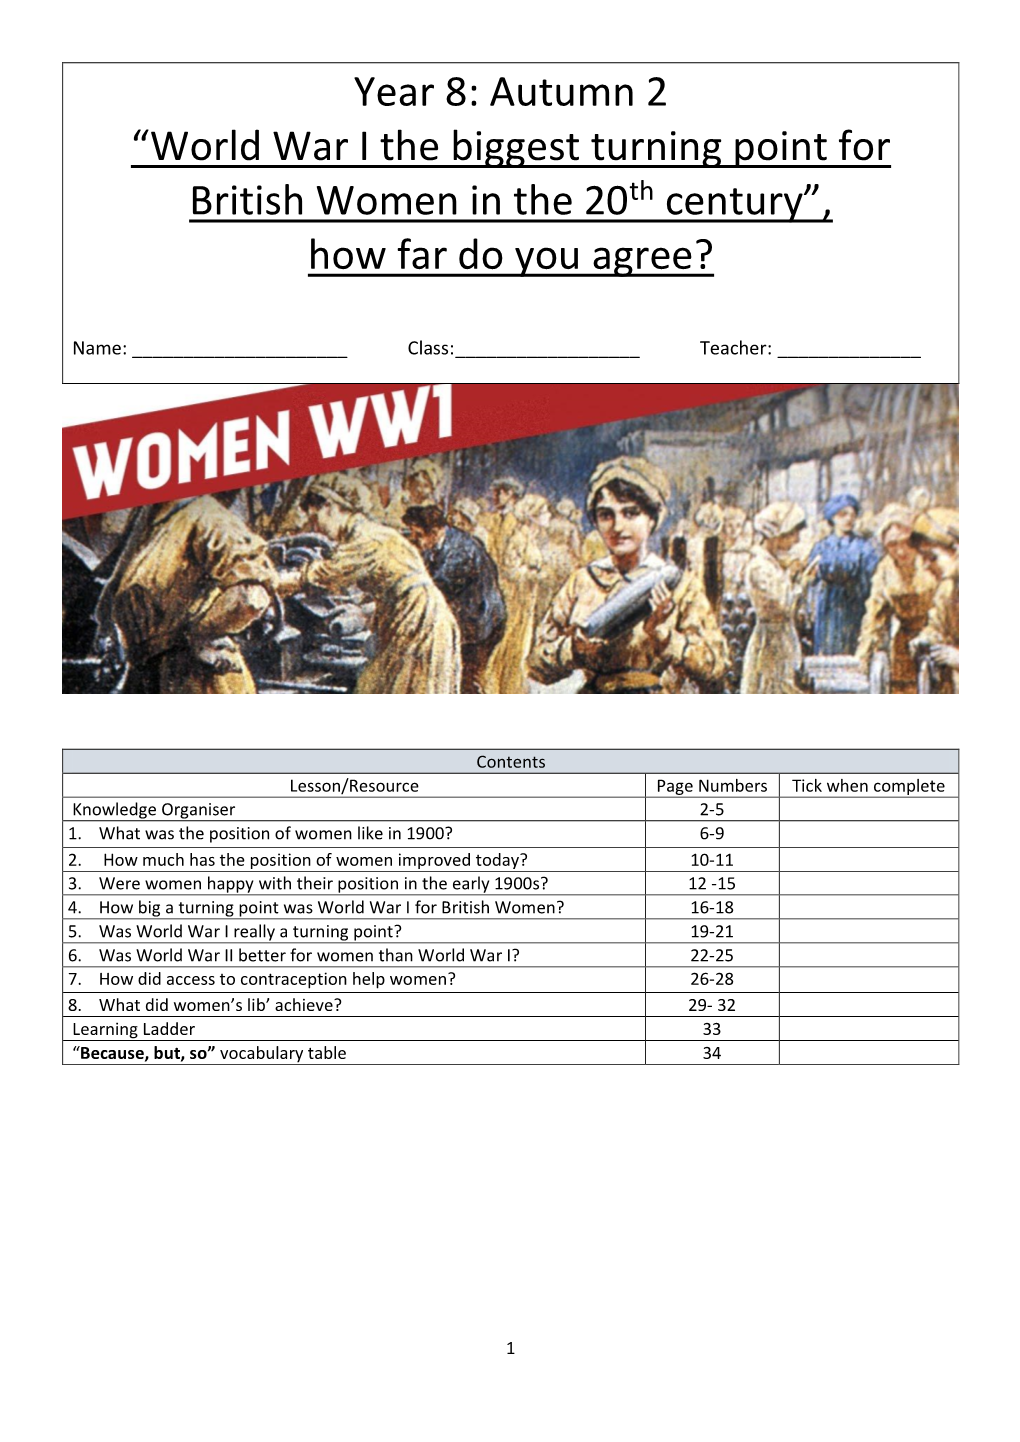 World War I the Biggest Turning Point for British Women in the 20Th Century”, How Far Do You Agree?